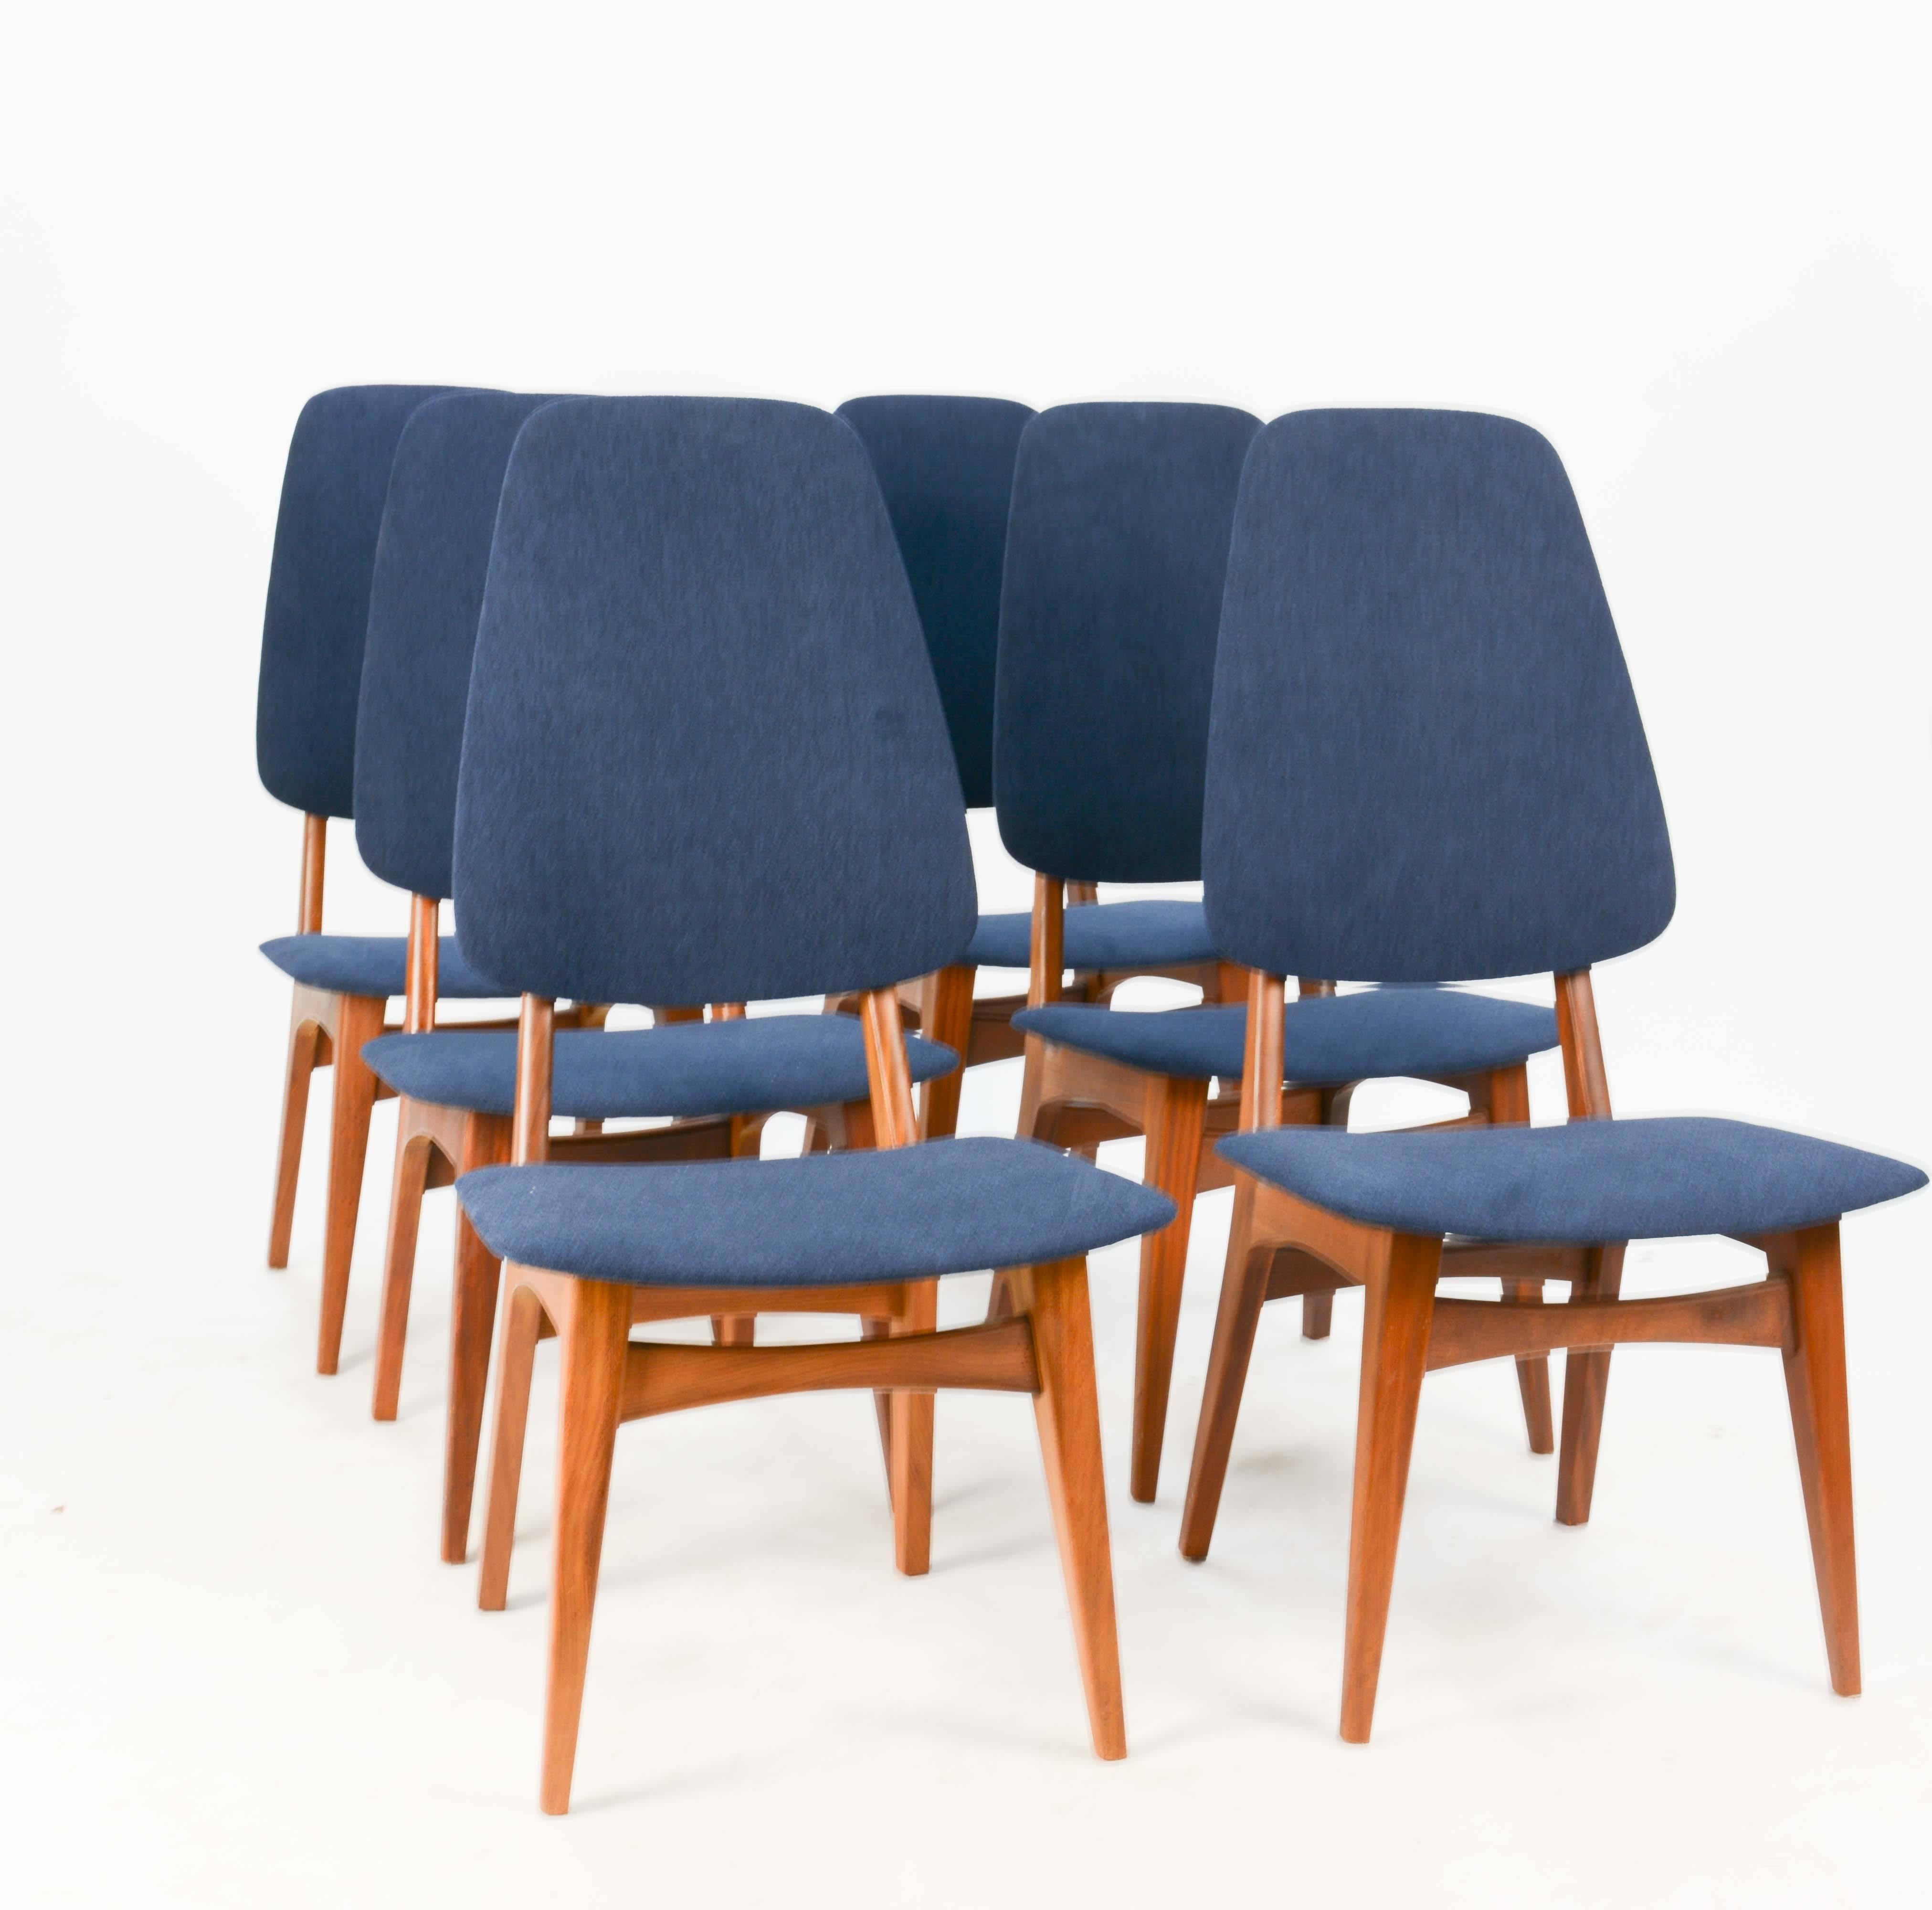 A set of six Sorheim Bruk's Afromosia high back dining chairs of Norway. The frames are in walnut and the seats and back have freshly been done in a Royal blue suede. These are very comfortable chairs and we have ten in total if needed. Measures: